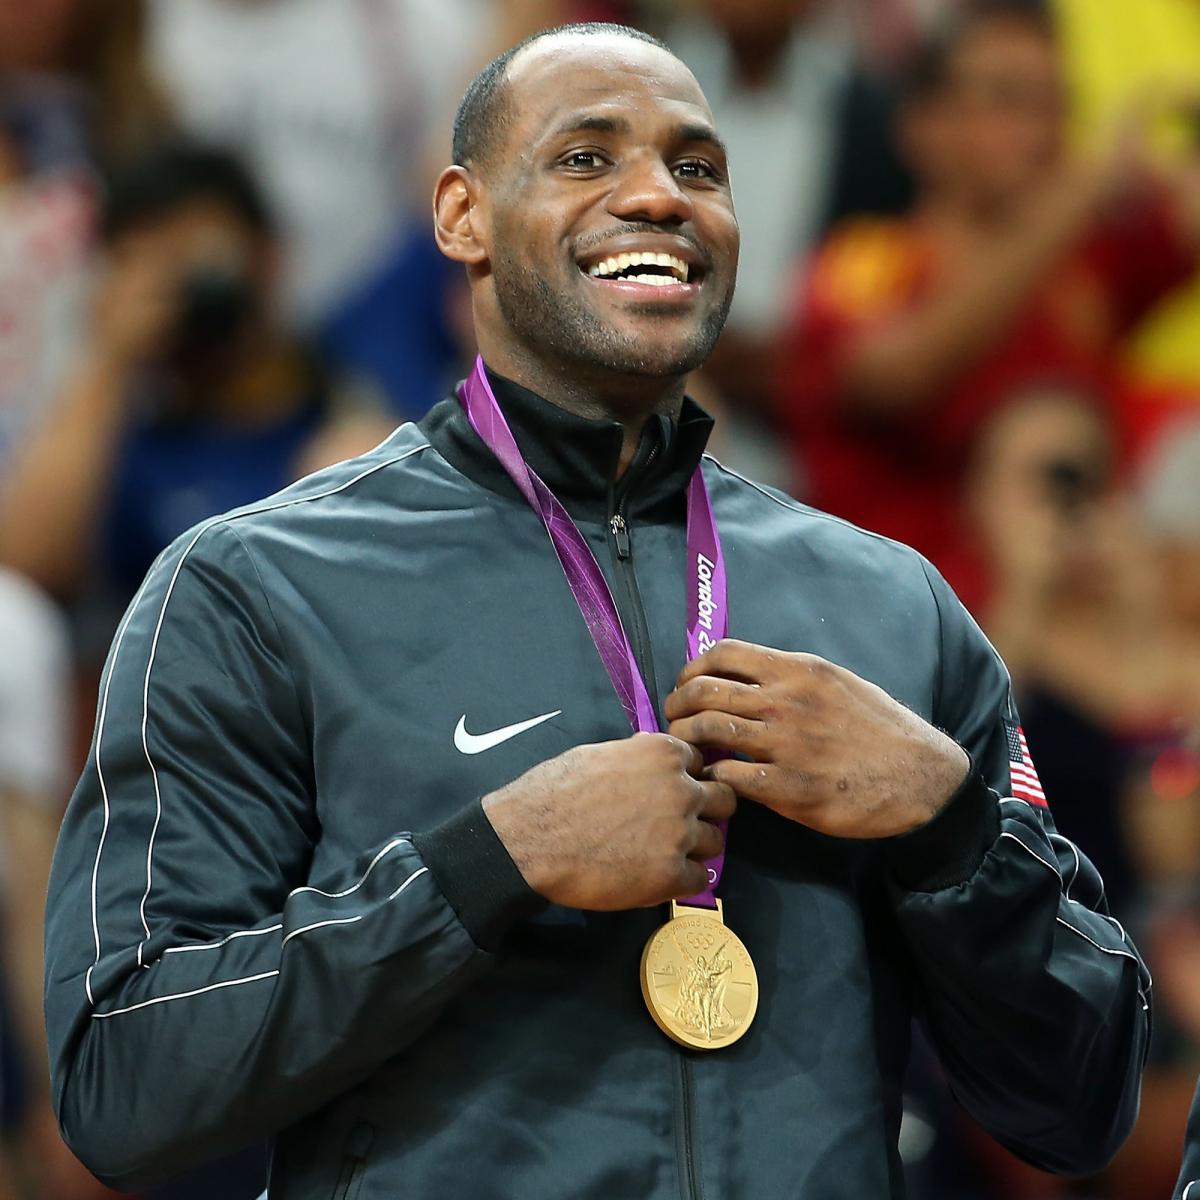 LeBron James Is Wise to Step Away from International Basketball